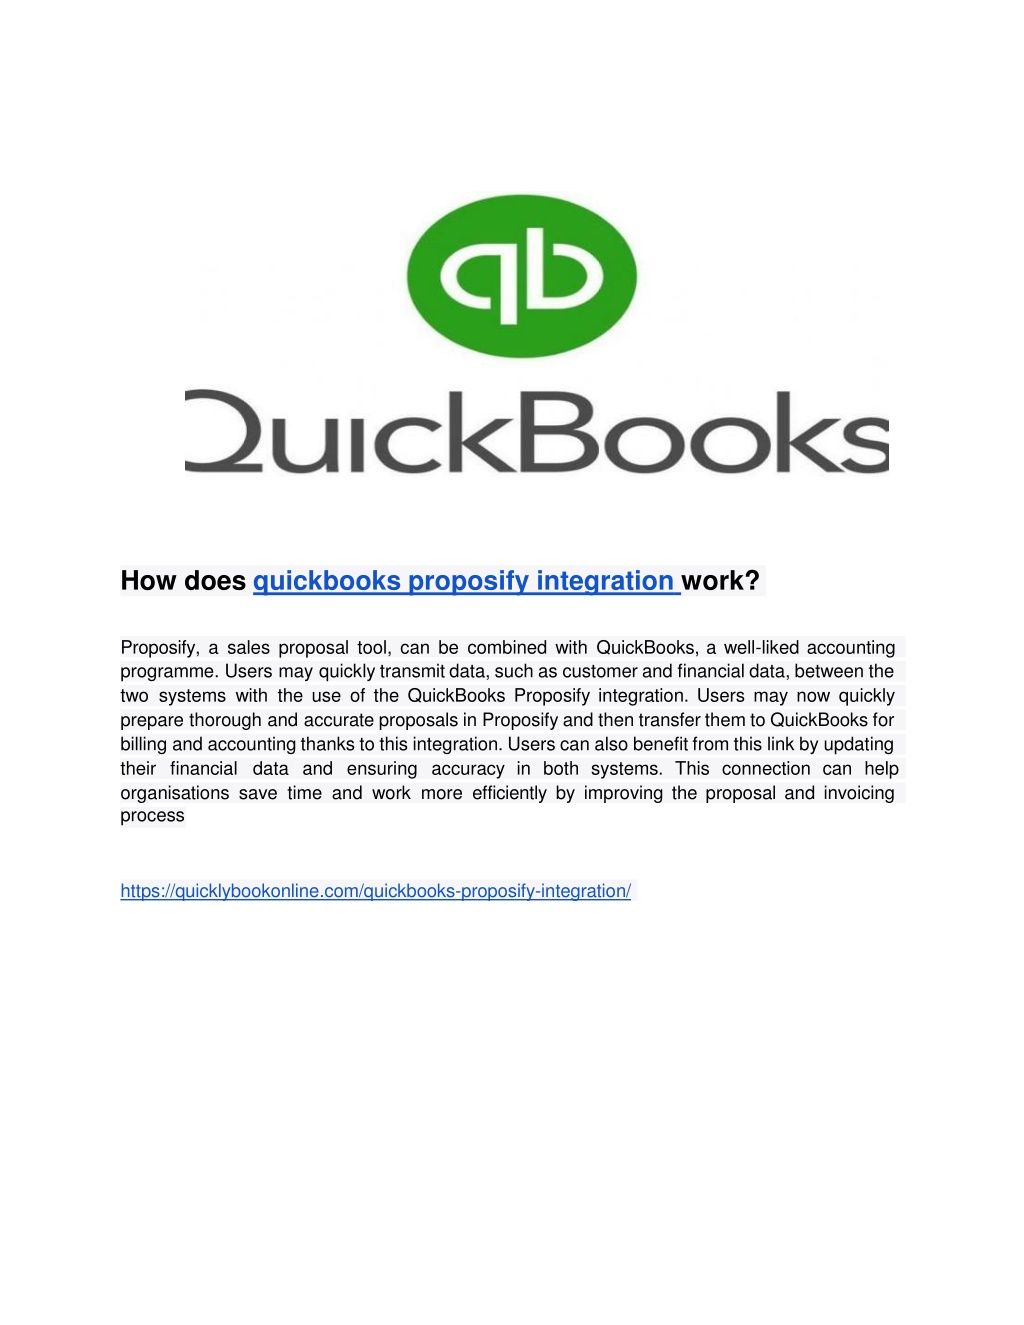 PPT How does quickbooks proposify integration work? PowerPoint